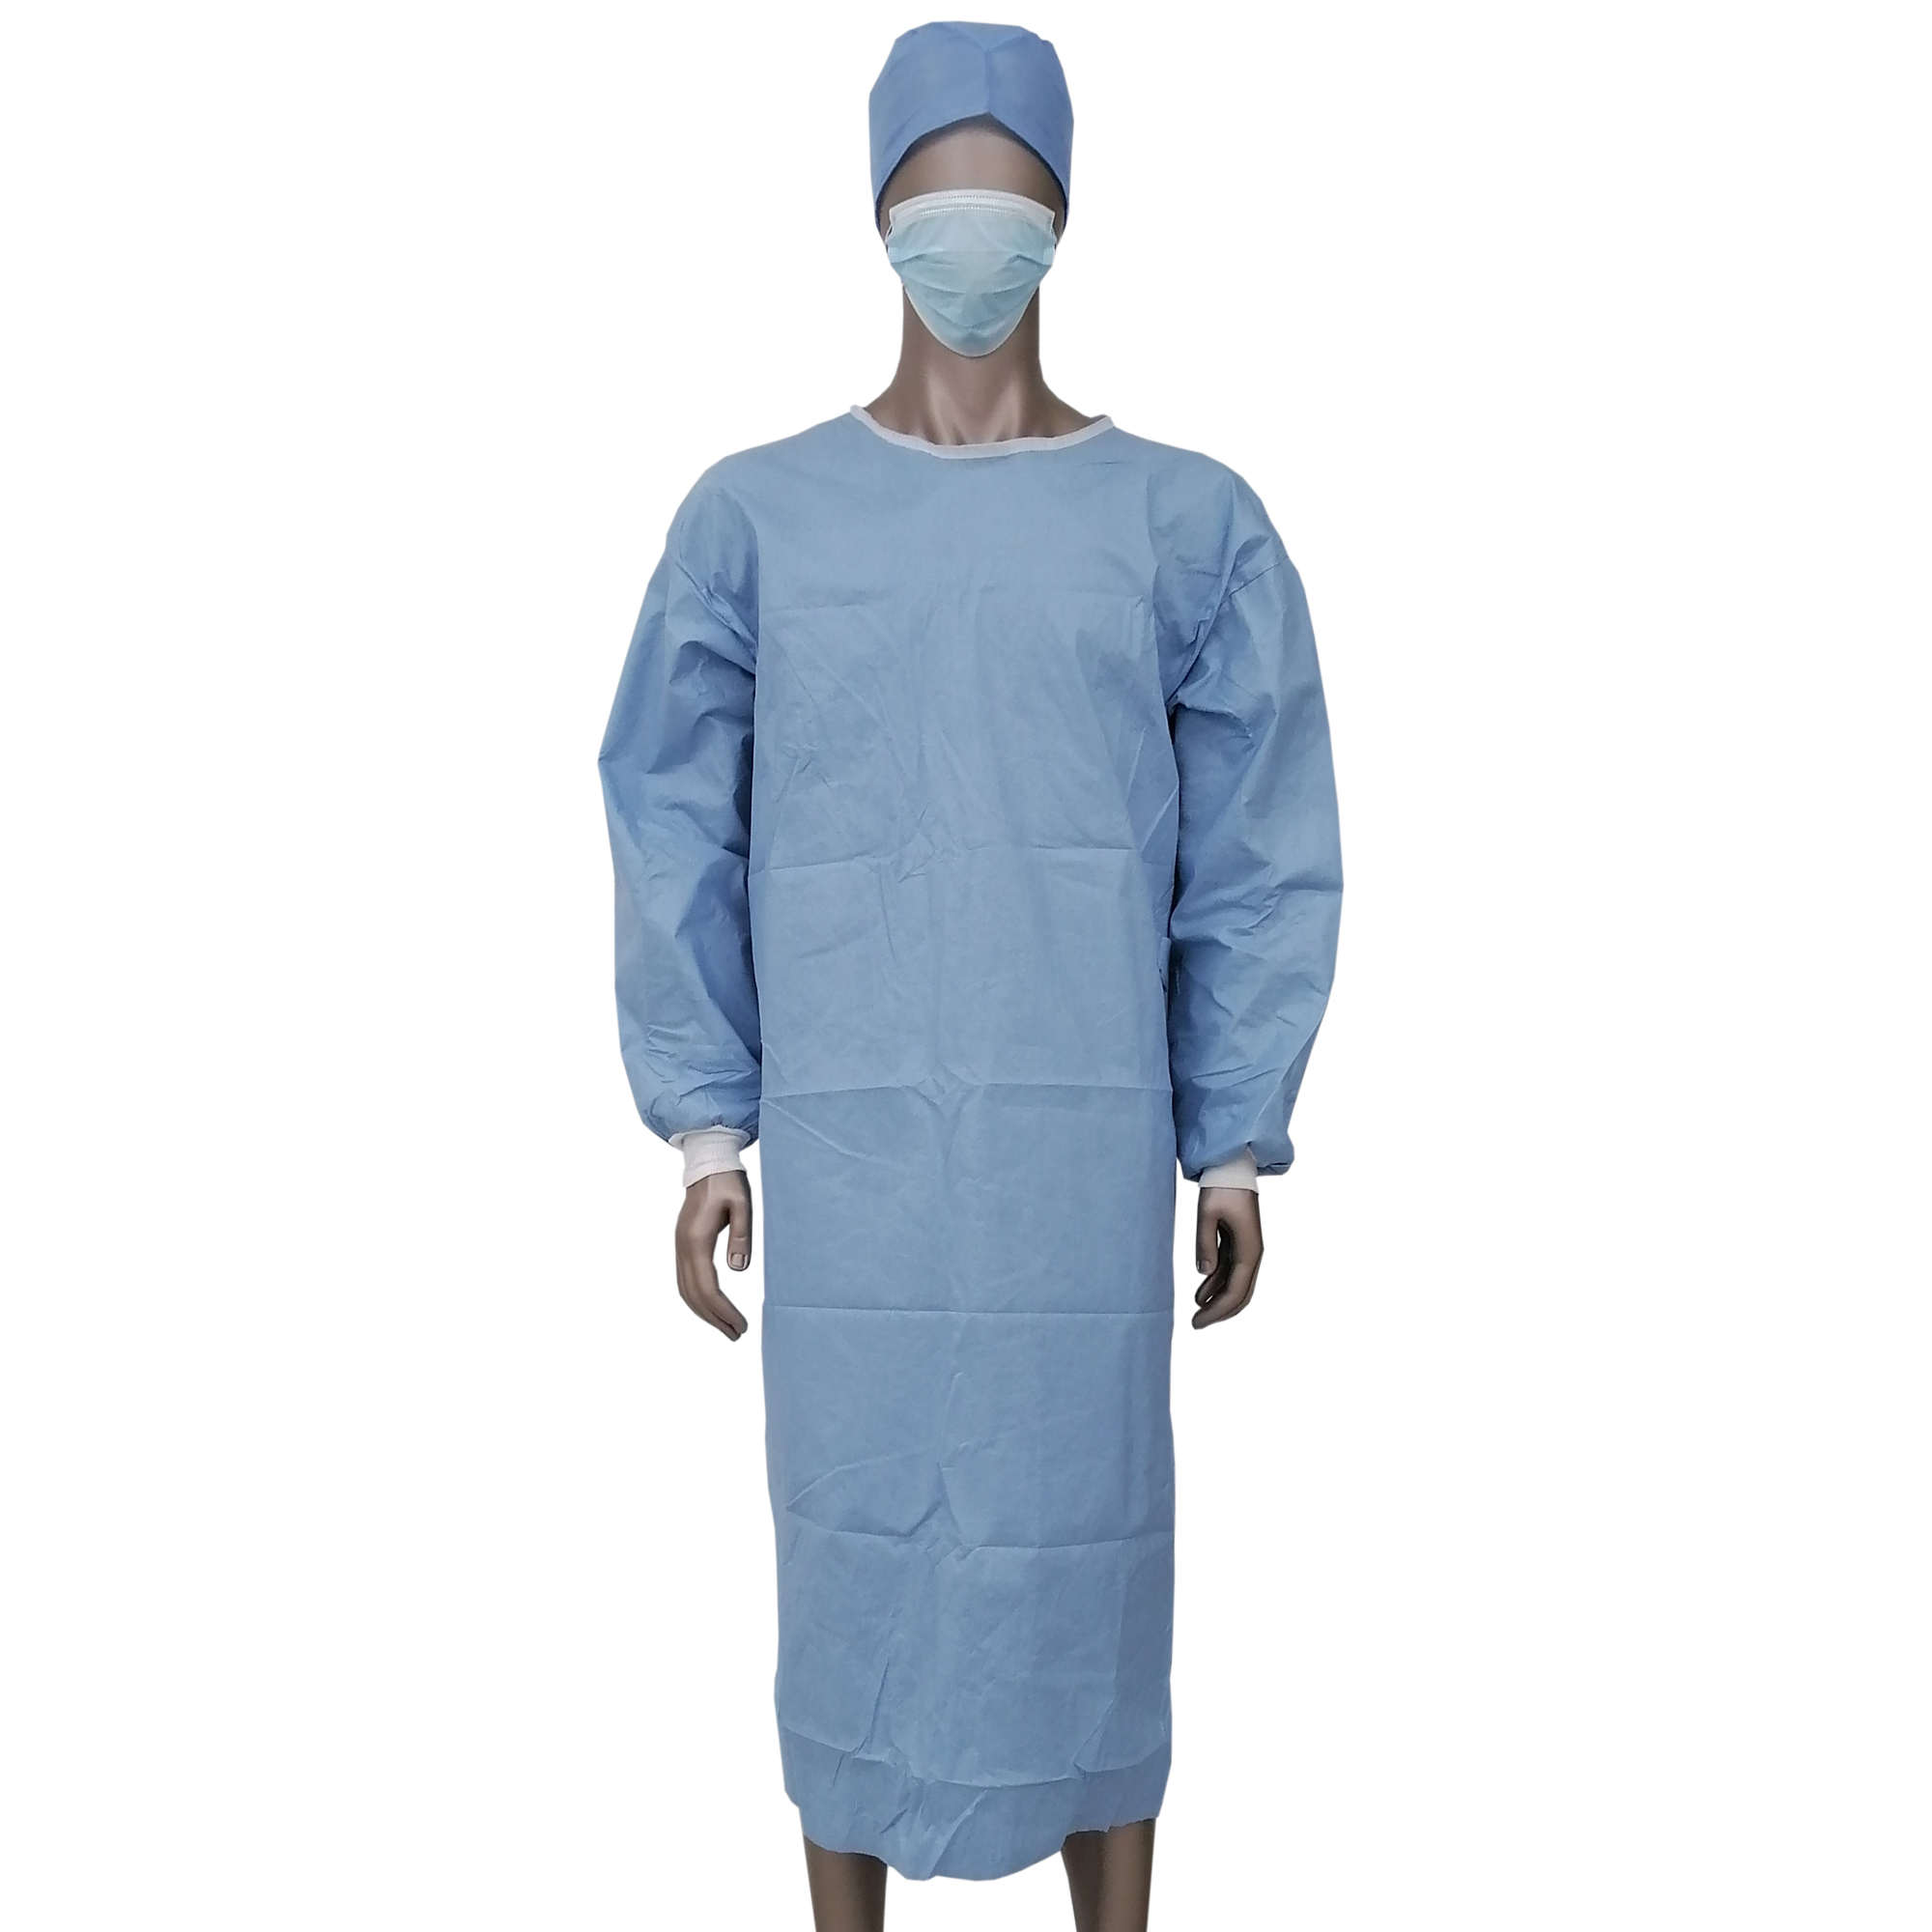 Woodpulp spunlace disposable full reinforced surgical gowns 